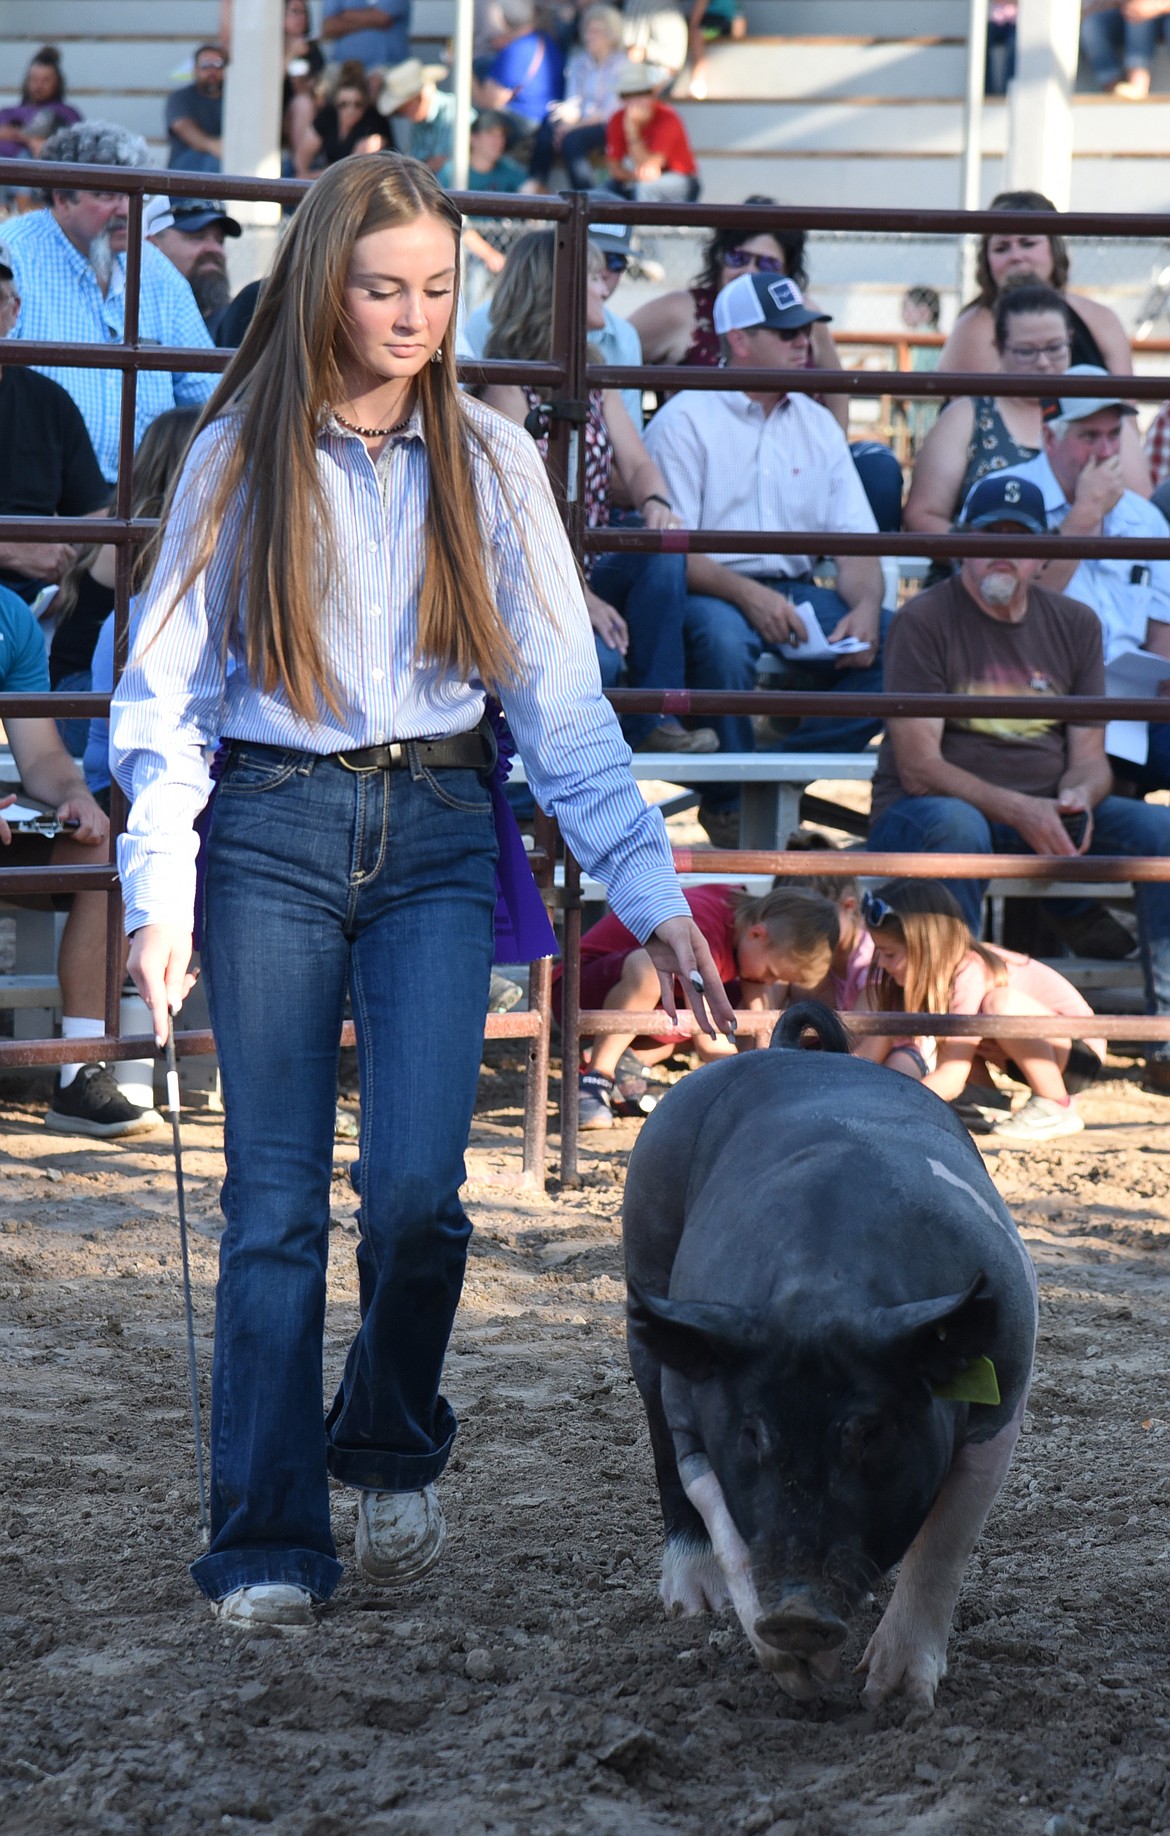 Ryan Walchuck, shown here with her hog, received championship awards for both her hog and her showmanship skills at the Lake County Fair. (Marla Hall/Lake County Leader)